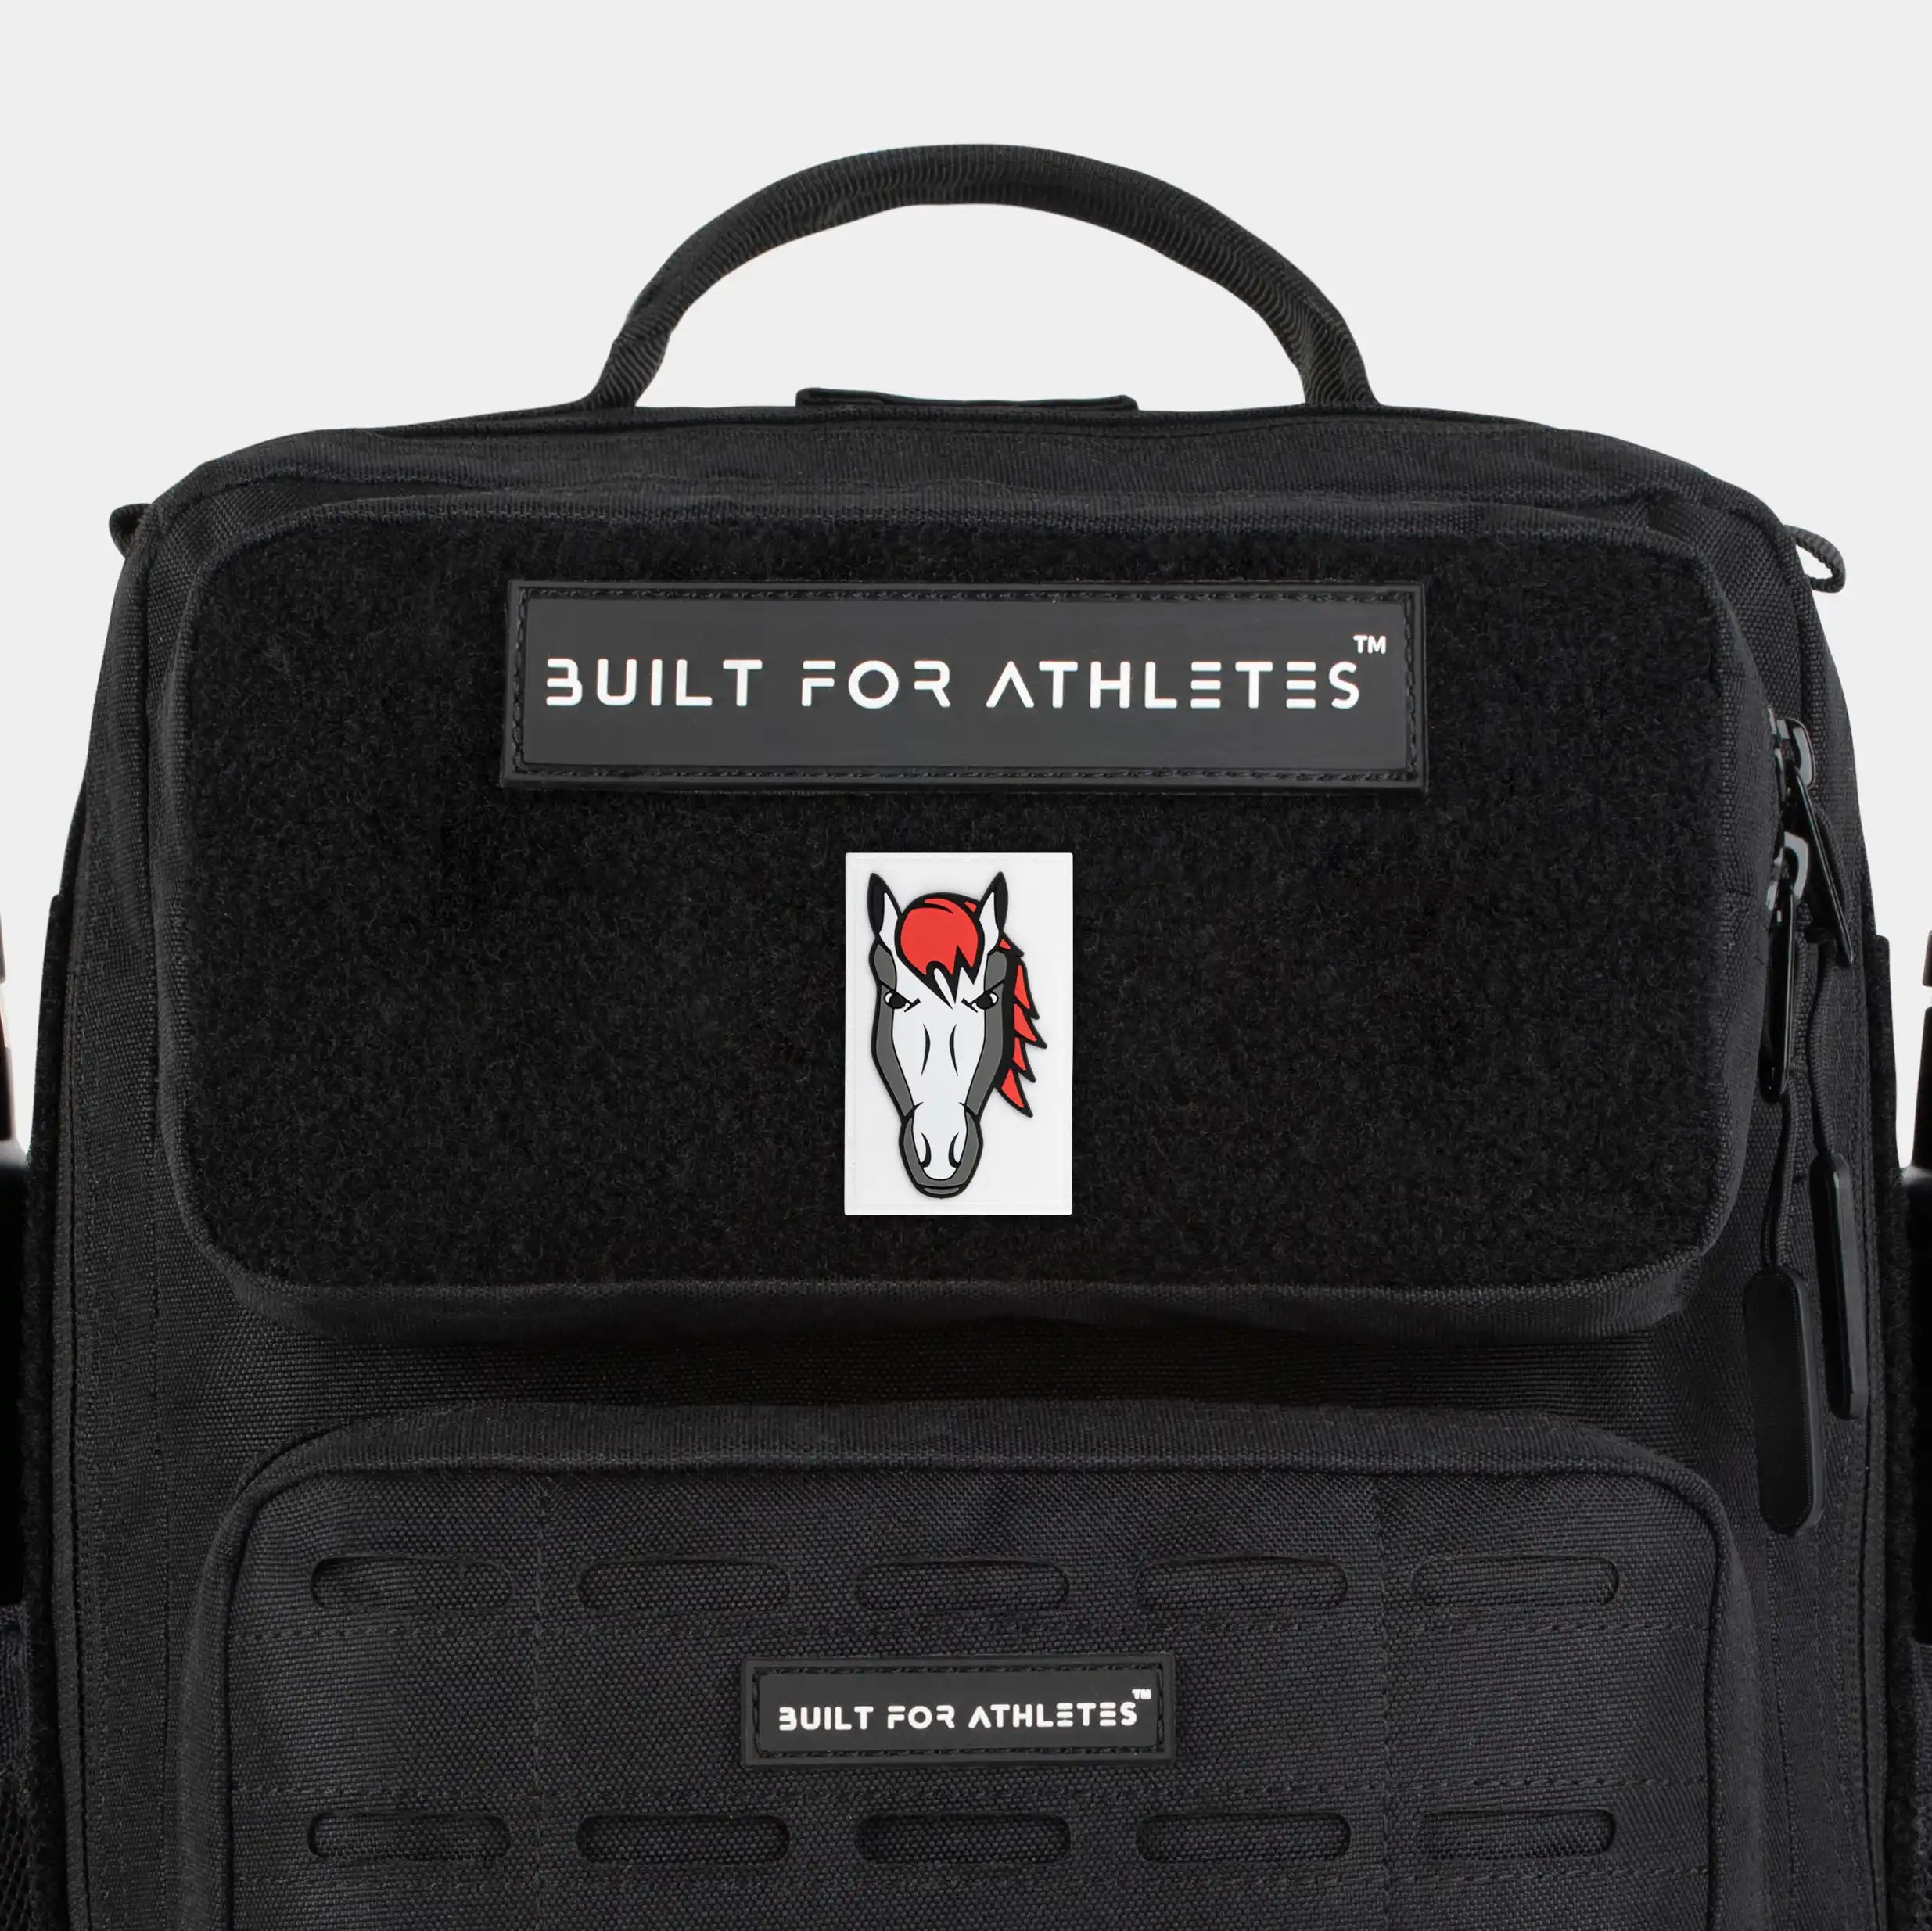 Built for Athletes Patches Leicester Basketball Team (Horse) Patch